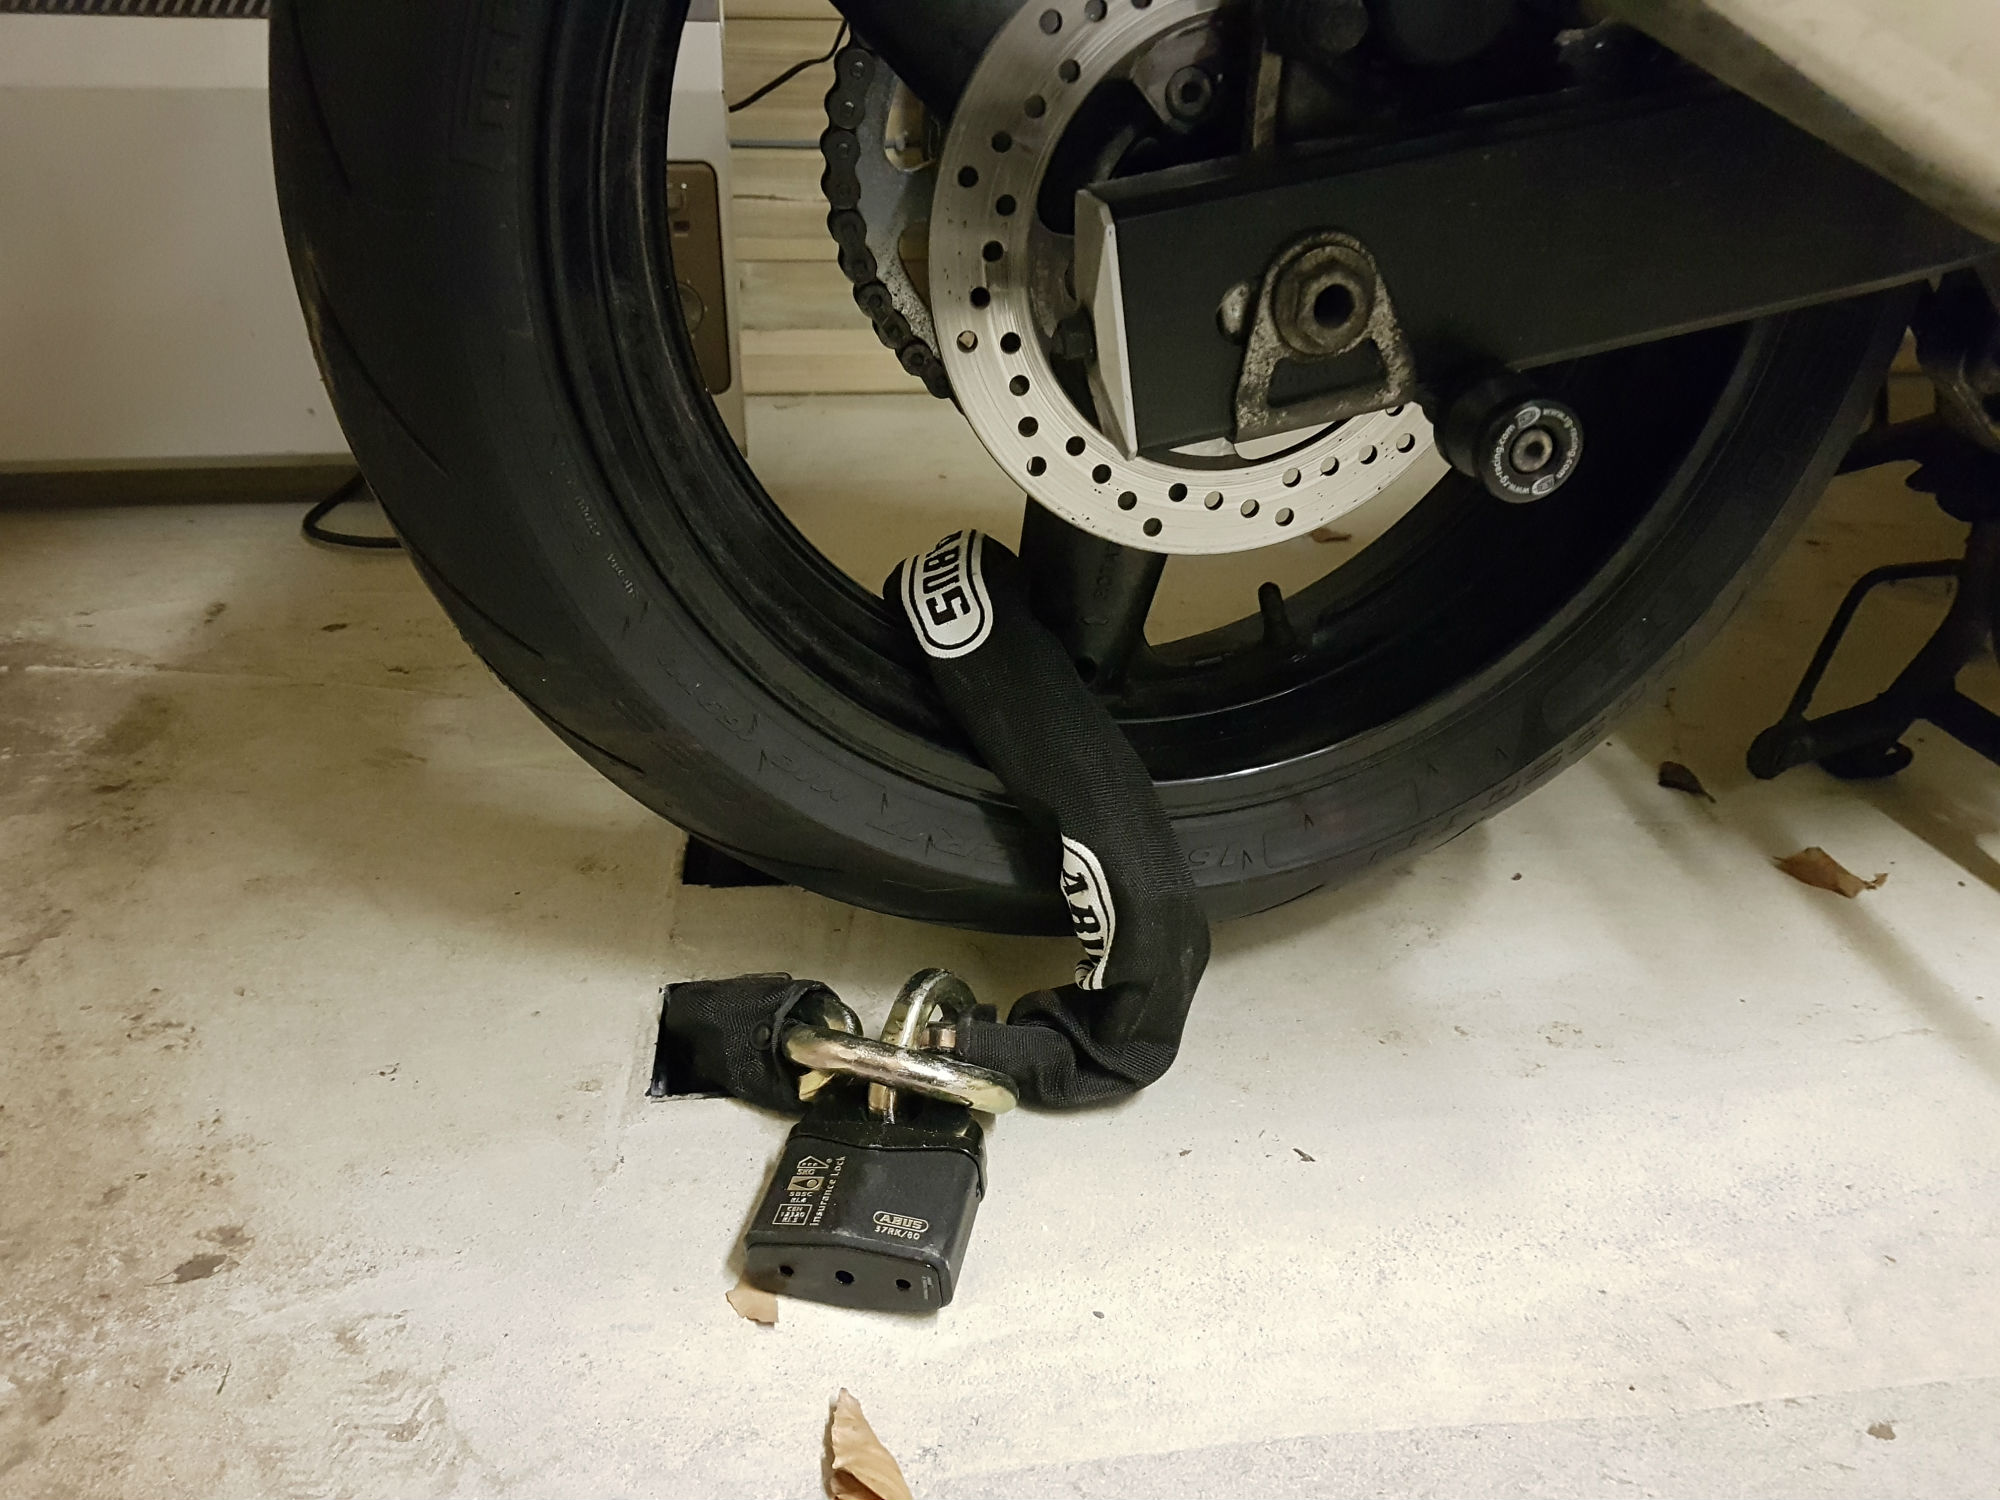 How to… store your motorcycle in winter